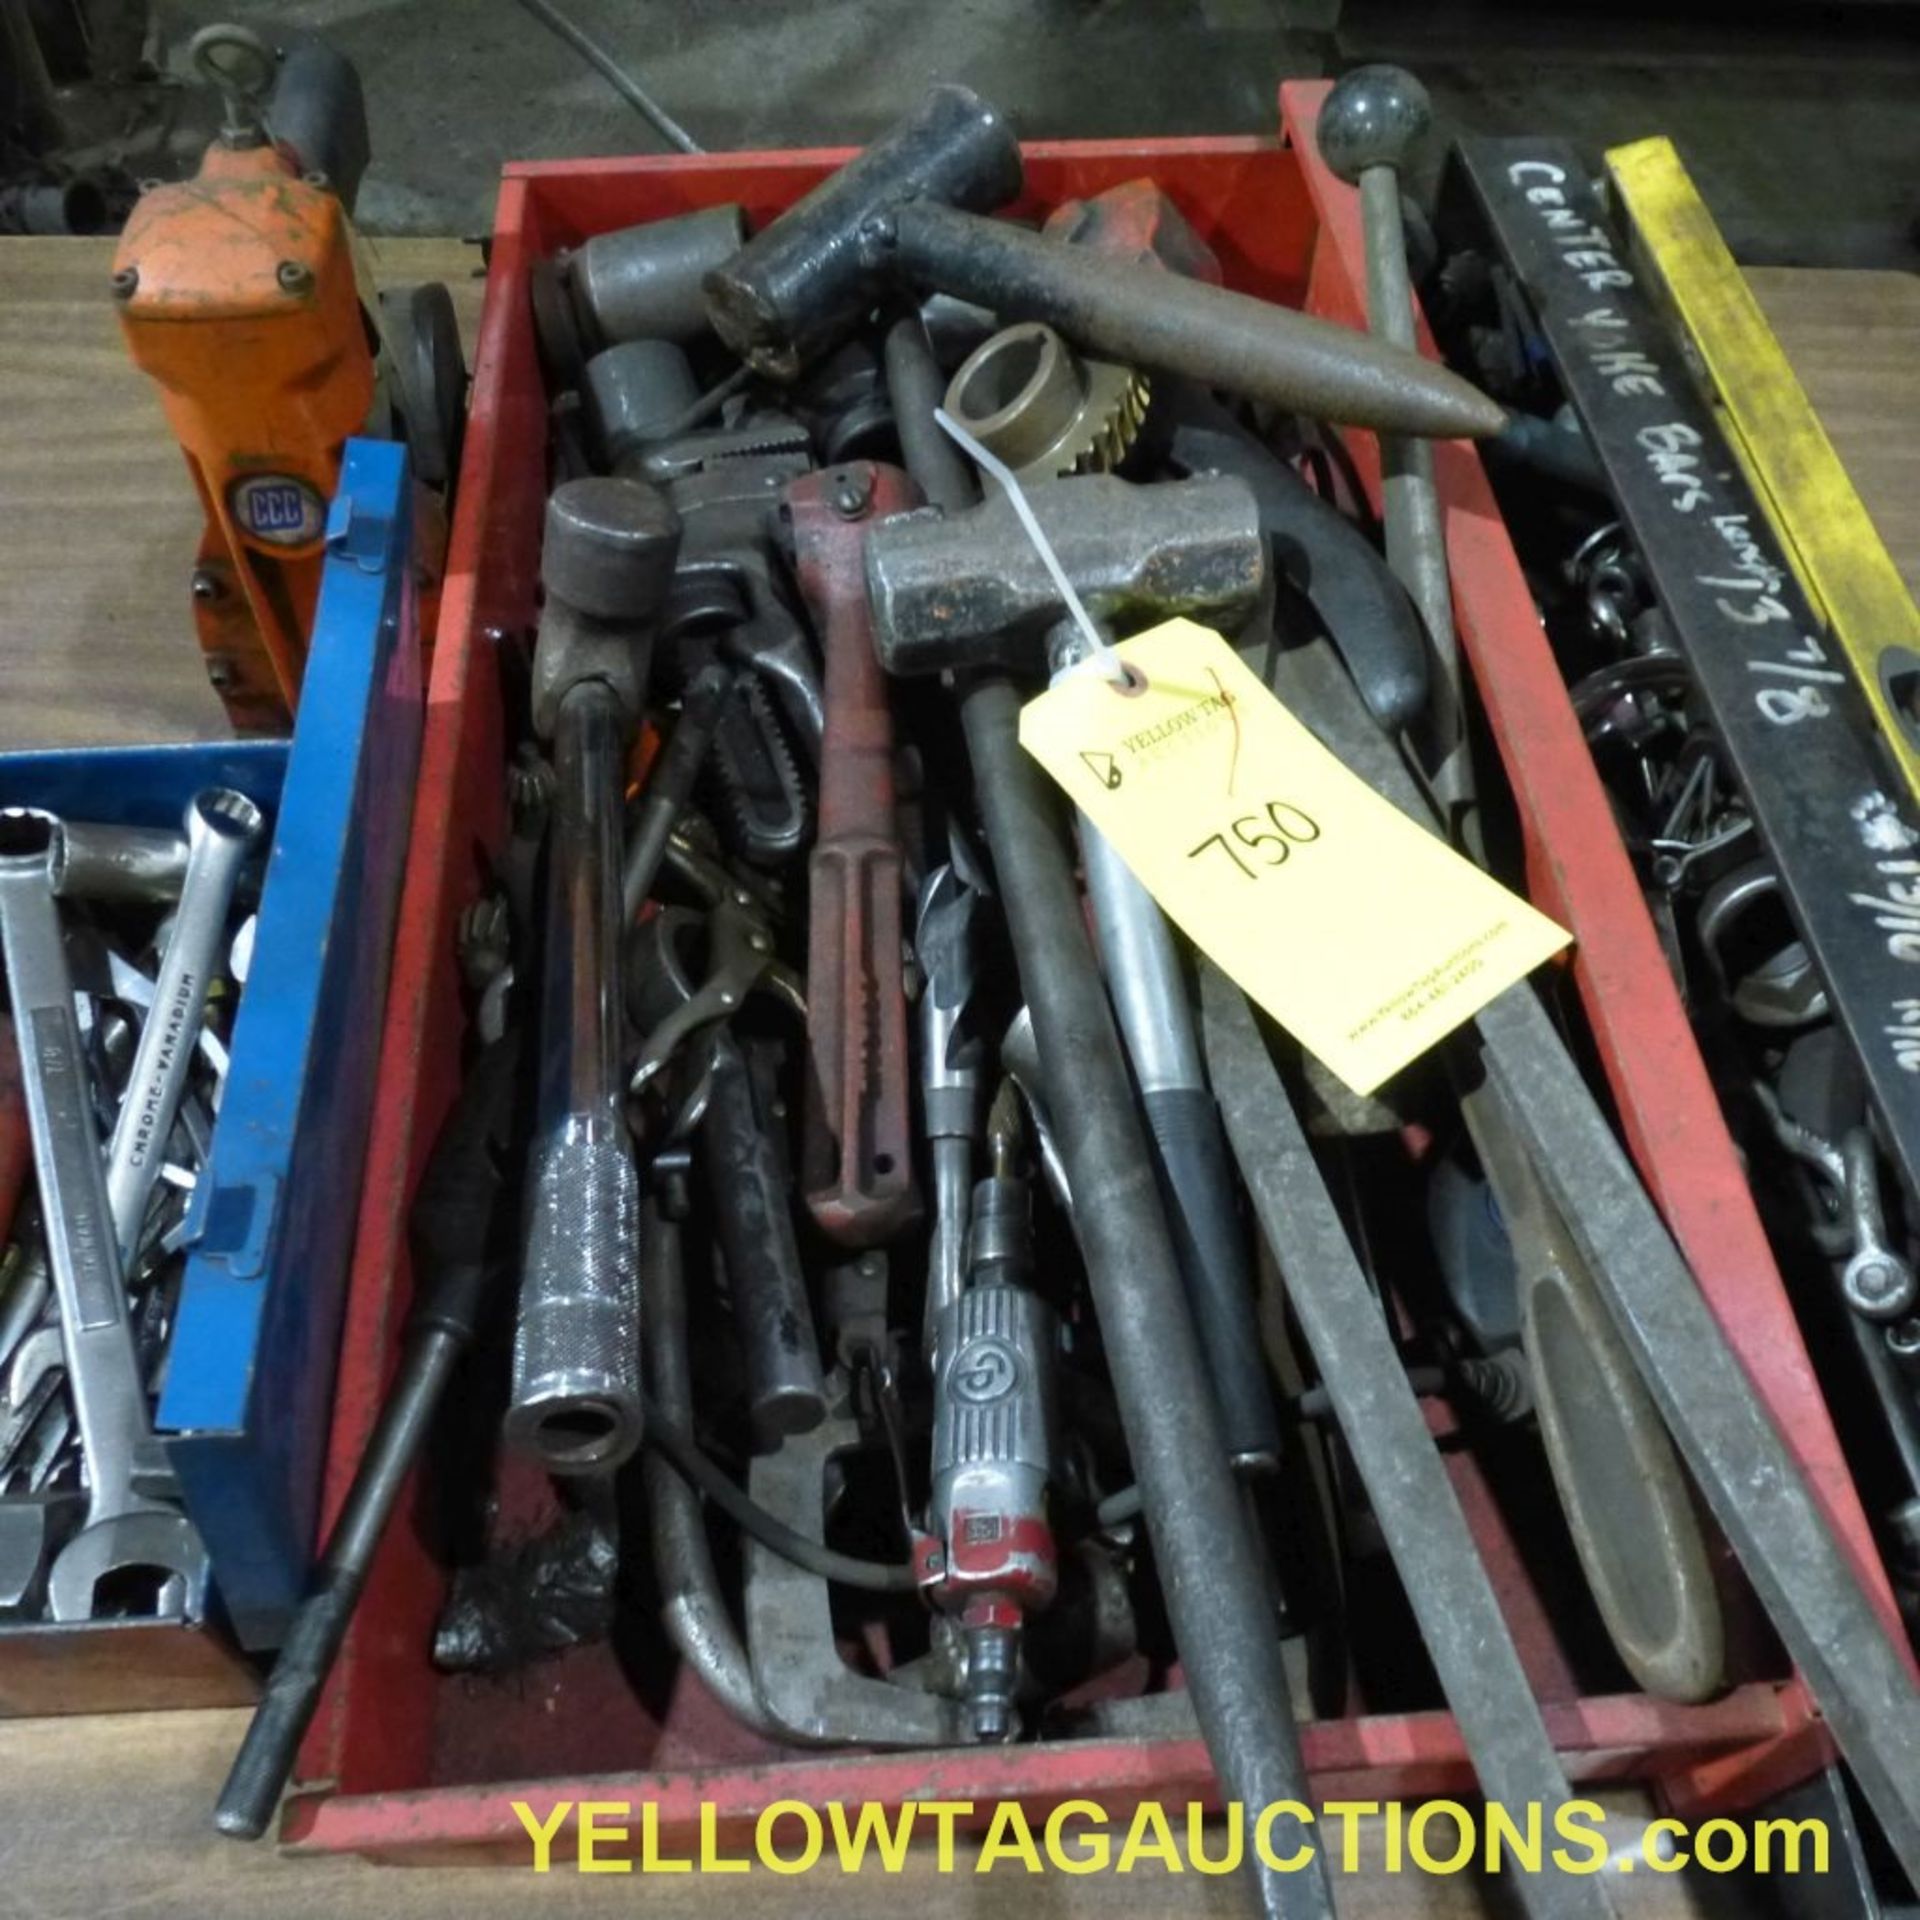 Lot of Assorted Tools|Includes: Hammers, Sockets, Visegrips, Box Stapler, Wrenches|Tag: 750 - Image 5 of 6